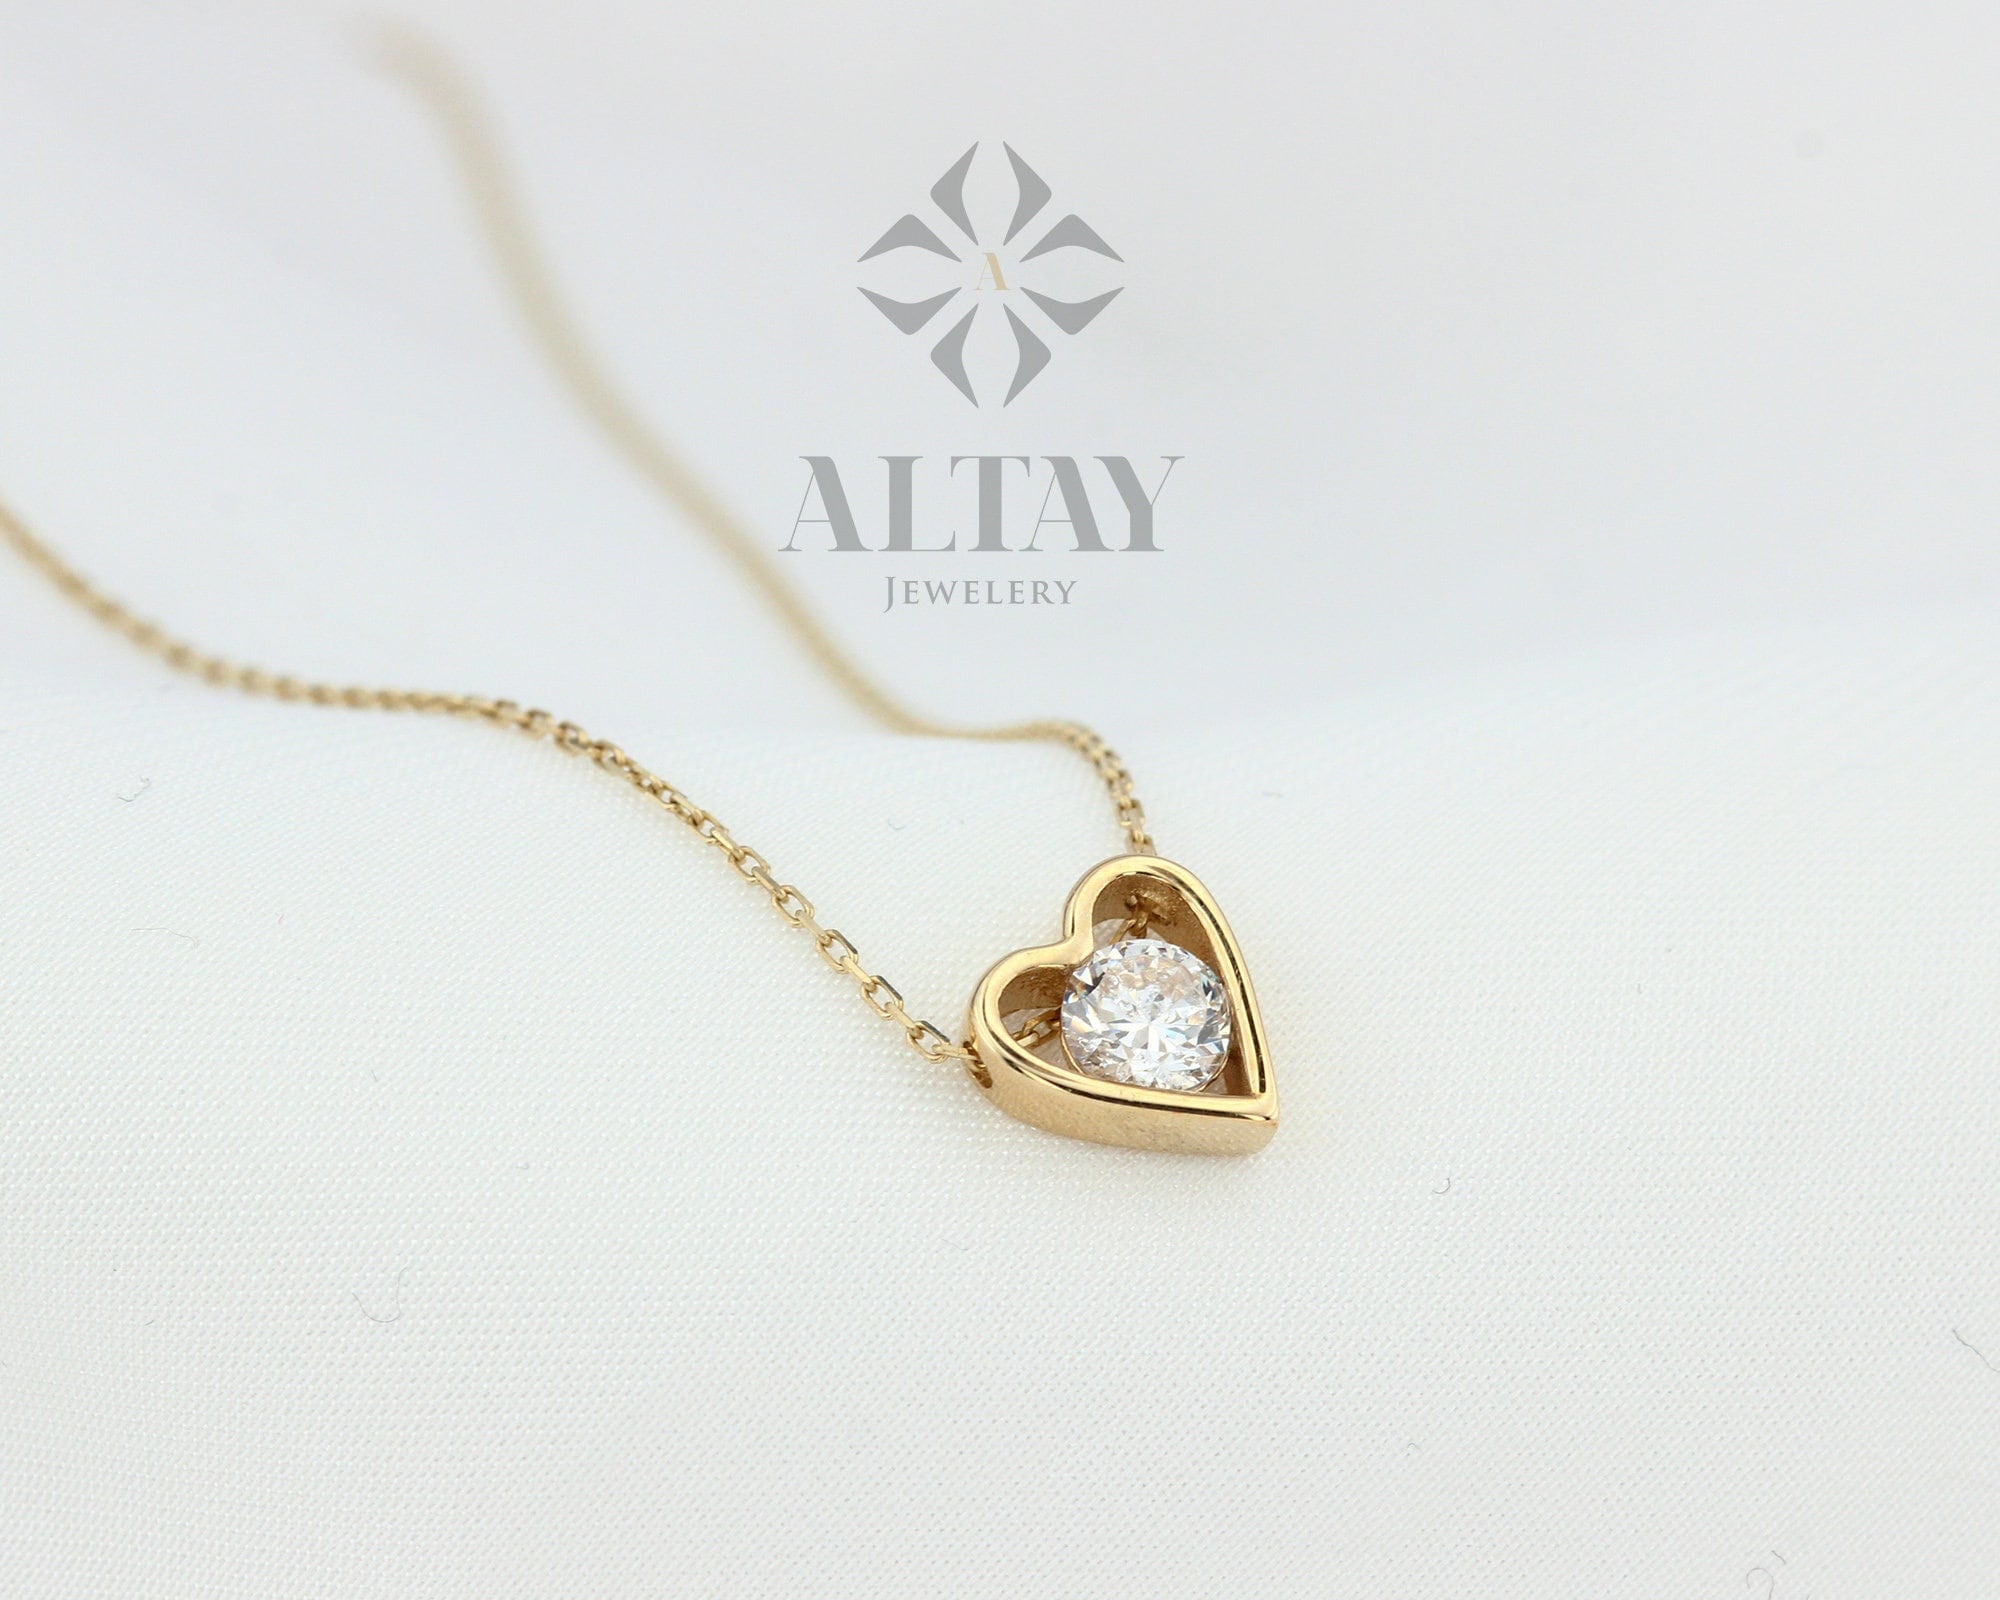 14K Gold Diamond Heart Necklace, Diamond Dainty Pendant, Small Love Charm, Meaningful Necklace, Gift for Her, Good Fortune Symbol, Delicate